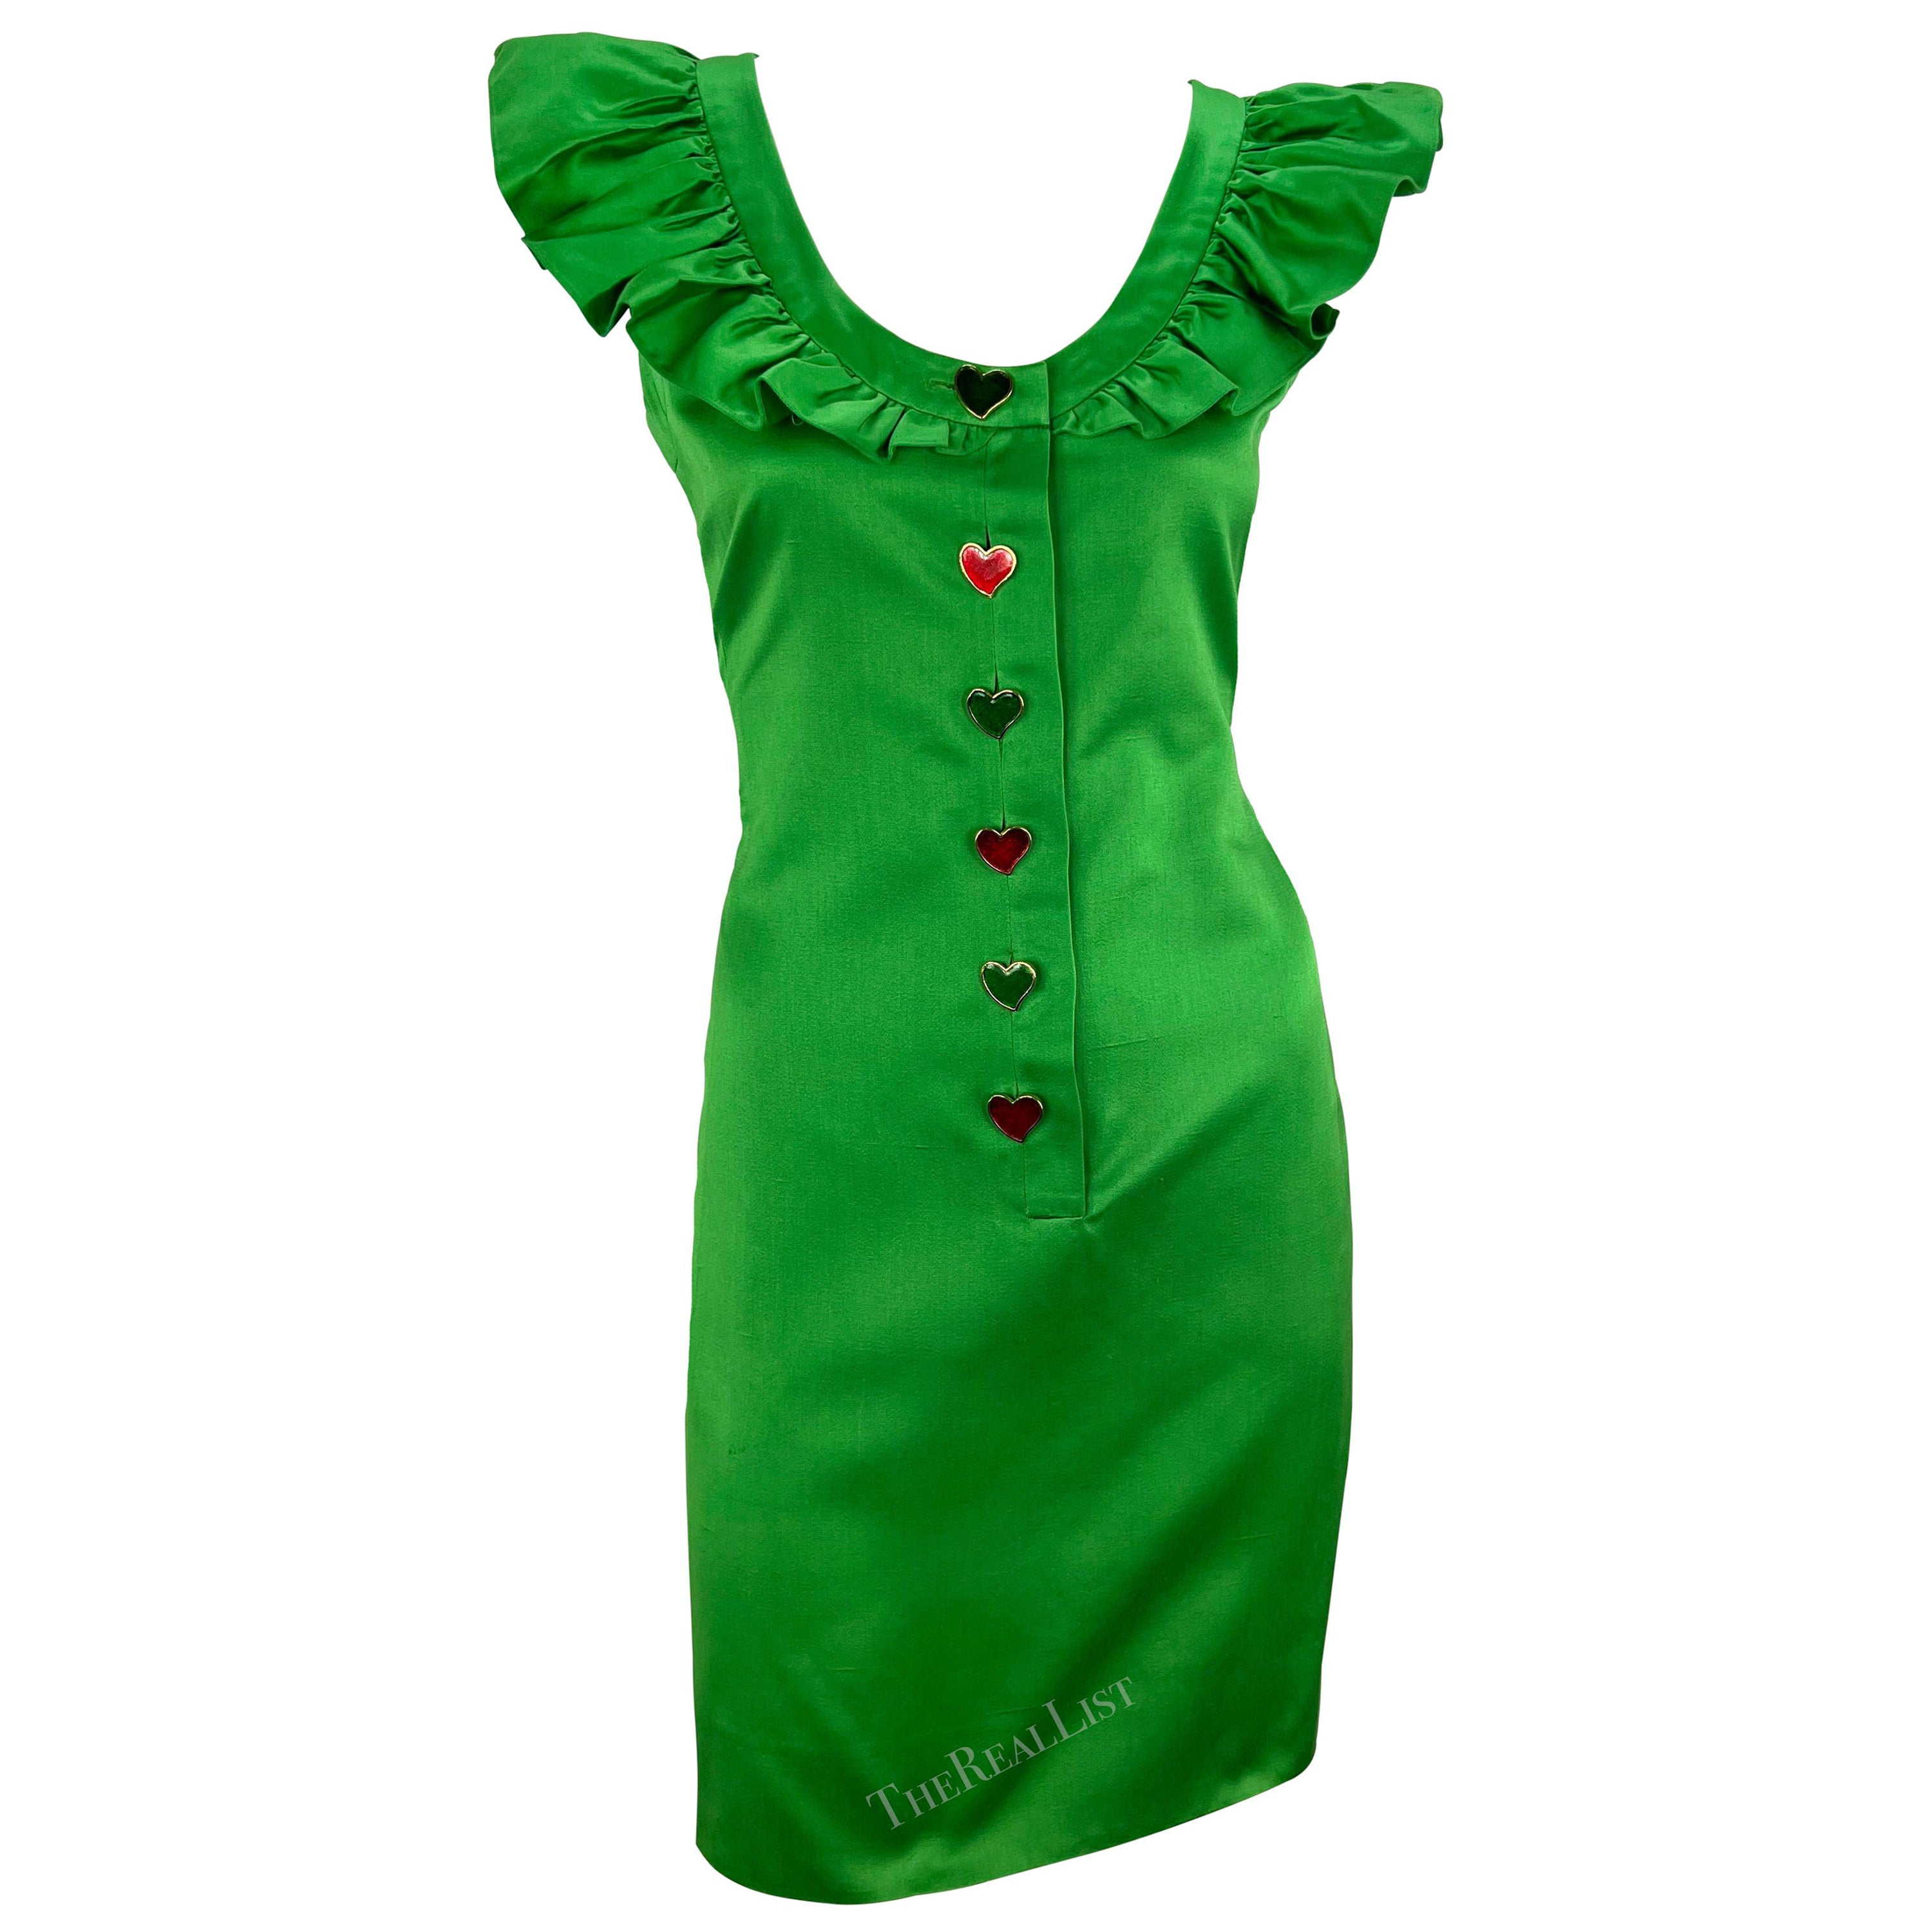 S/S 1992 Yves Saint Laurent Runway Ad Bright Green Ruffle Heart Button Dress For Sale